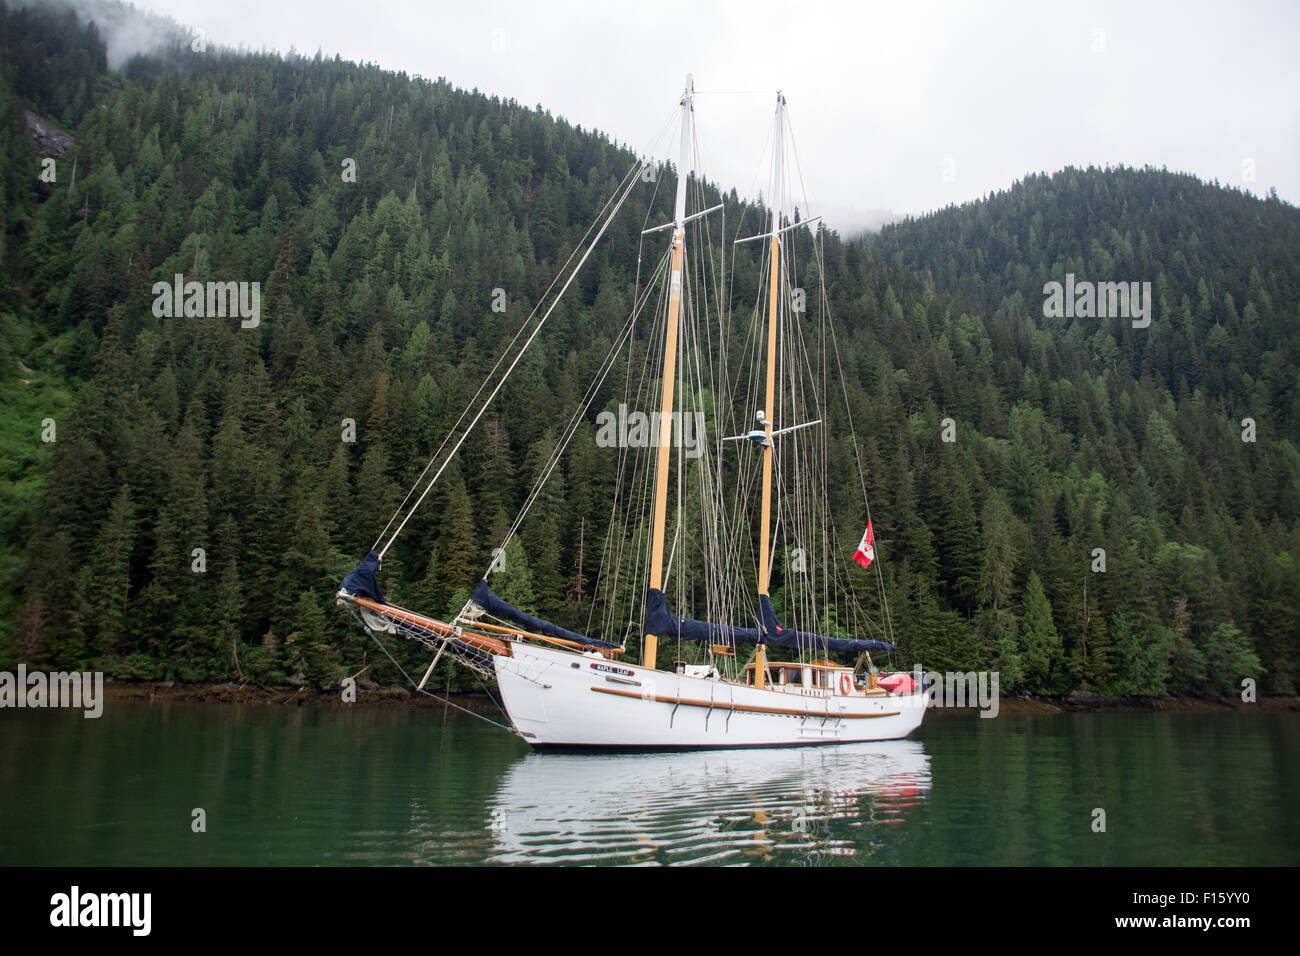 The 'Maple Leaf' - an ecotourism expedition schooner anchored in the coastal waters of the Great Bear Rainforest, northern British Columbia, Canada. Stock Photo